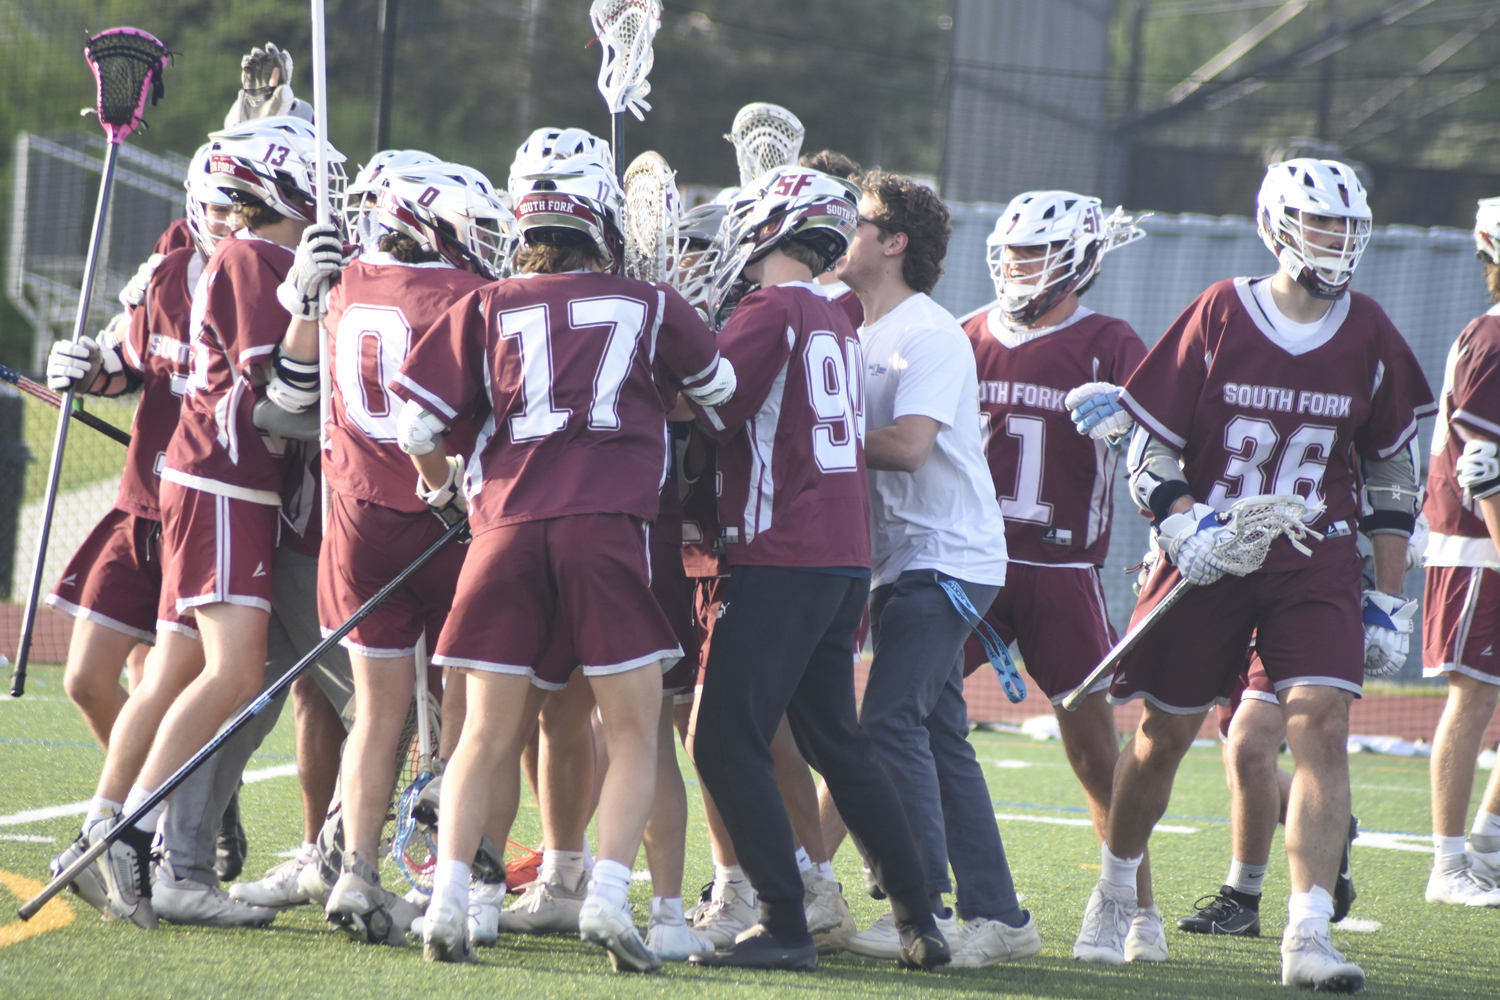 The Islanders mob goalie Oliver Edson after they defeated Commack, 14-13, on Wednesday. The victory should clinch a playoff spot for South Fork.   DREW BUDD